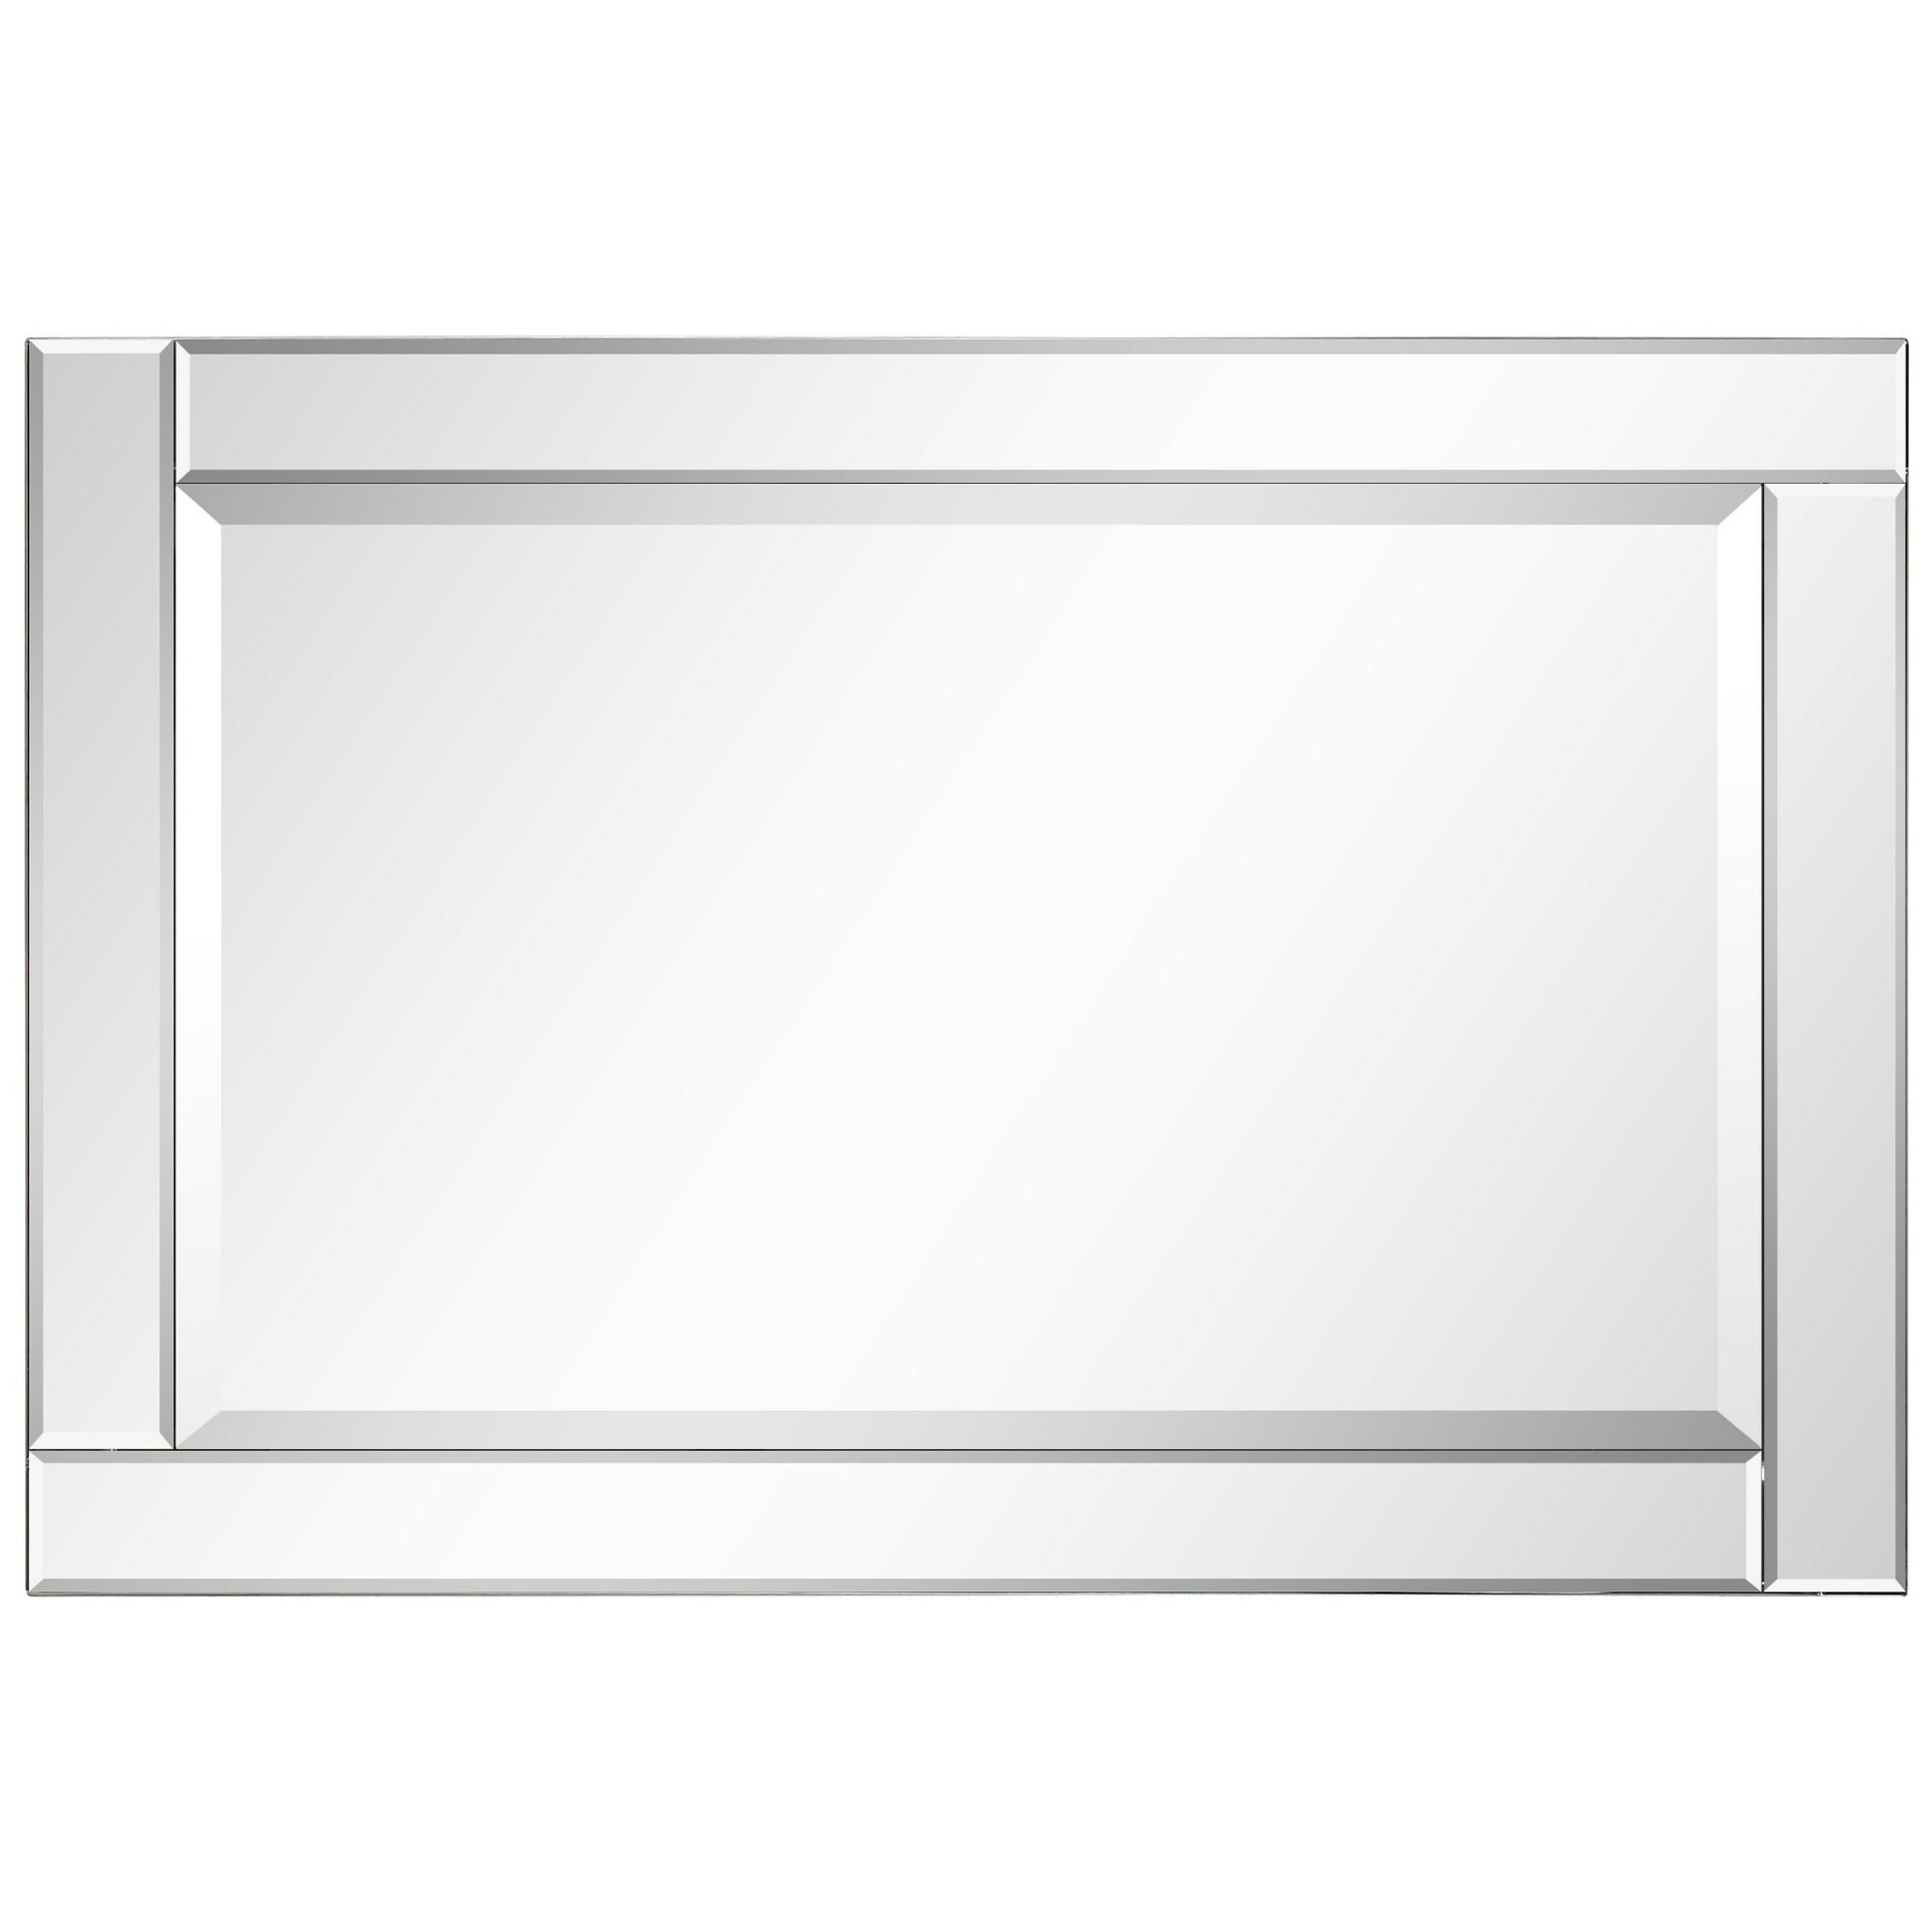 Empire Art Direct Wall Mirror 24-in W x 36-in H Clear Beveled Wall Mirror